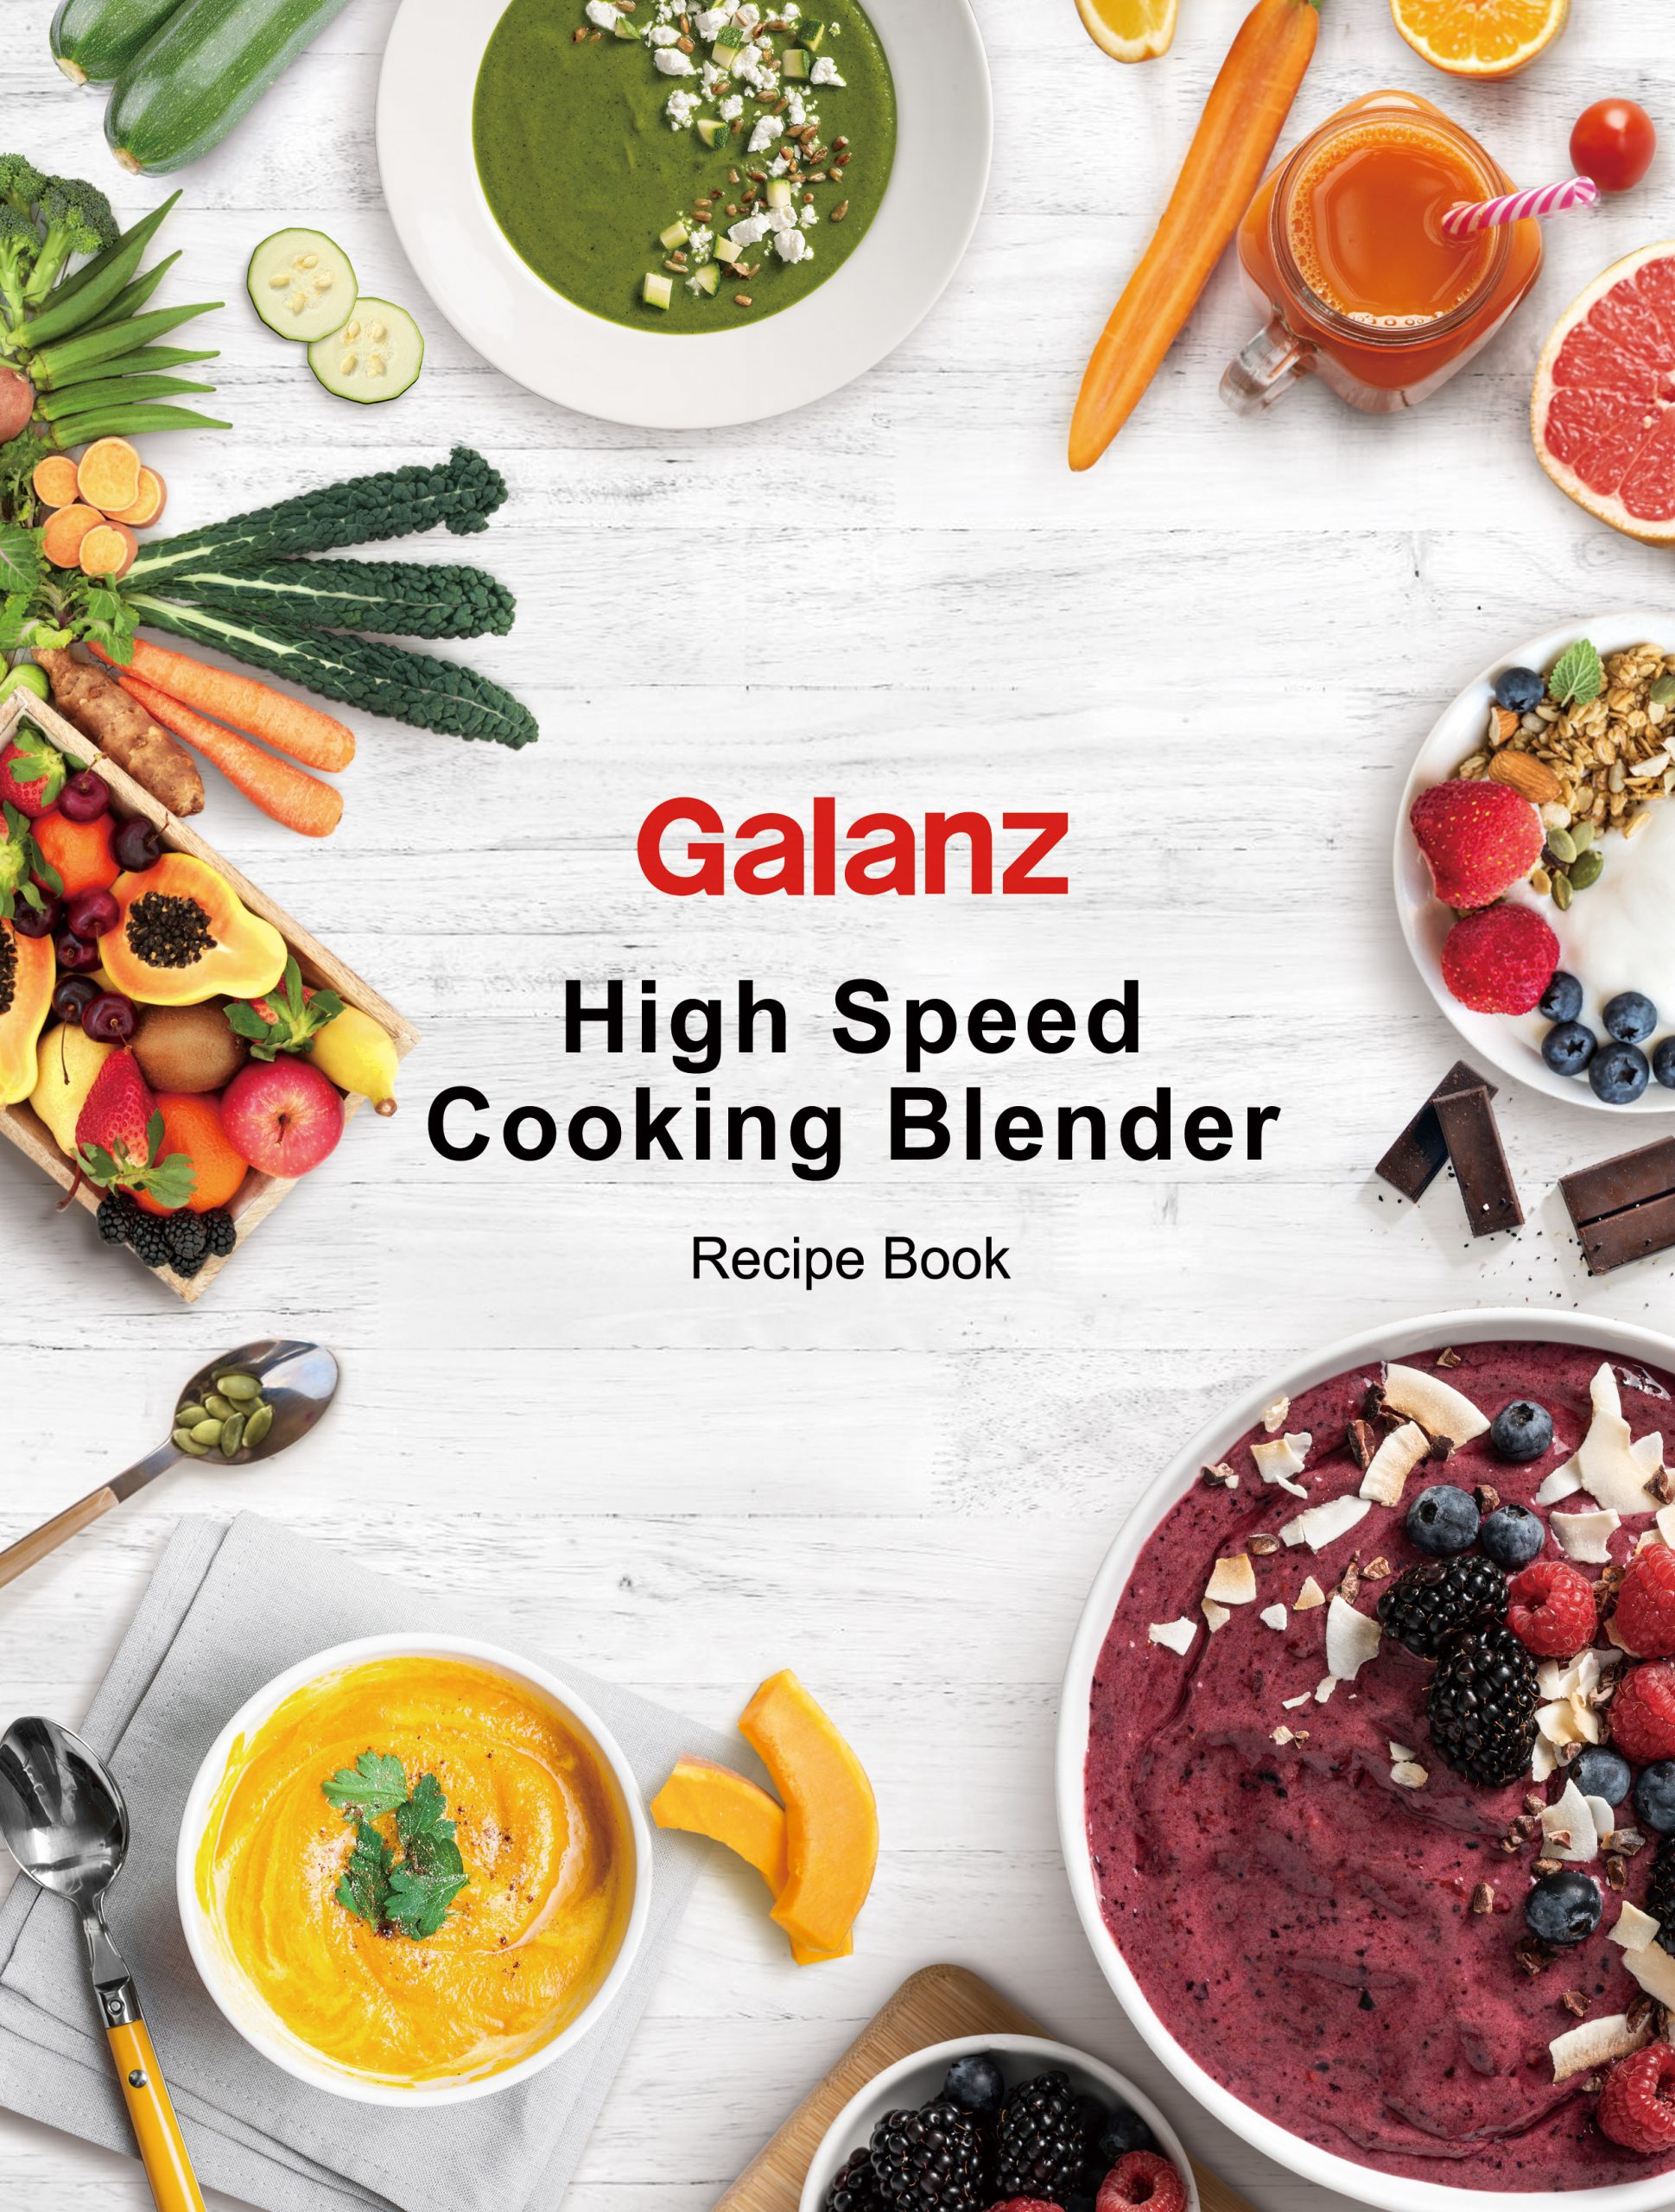 https://www.galanz.com/us/wp-content/uploads/2022/01/Blender-Recipe-Cover-1-scaled.jpg